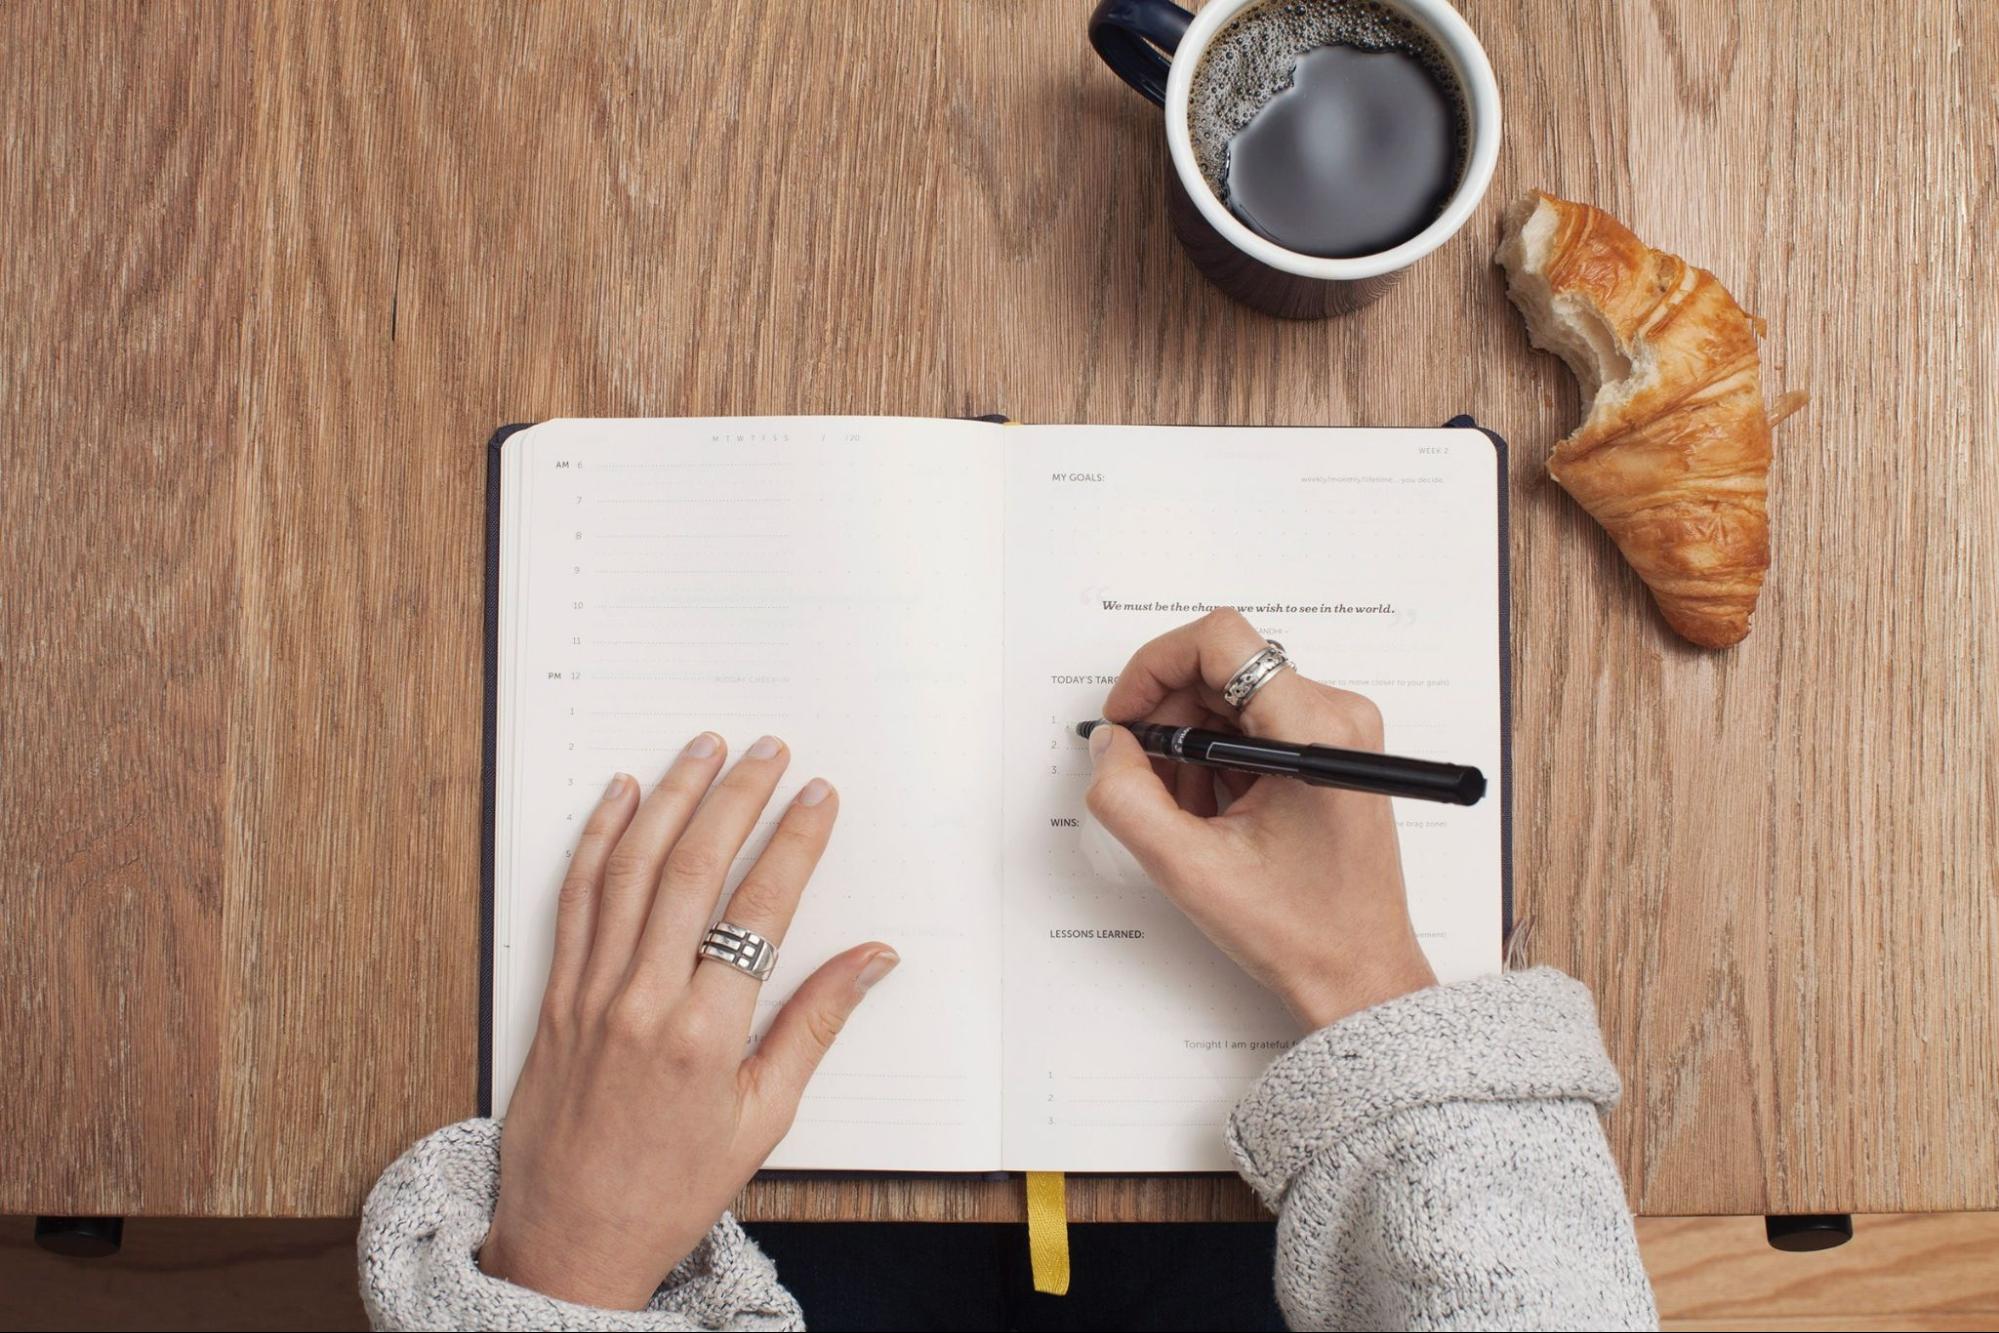 A college student eats breakfast while writing notes in her planner